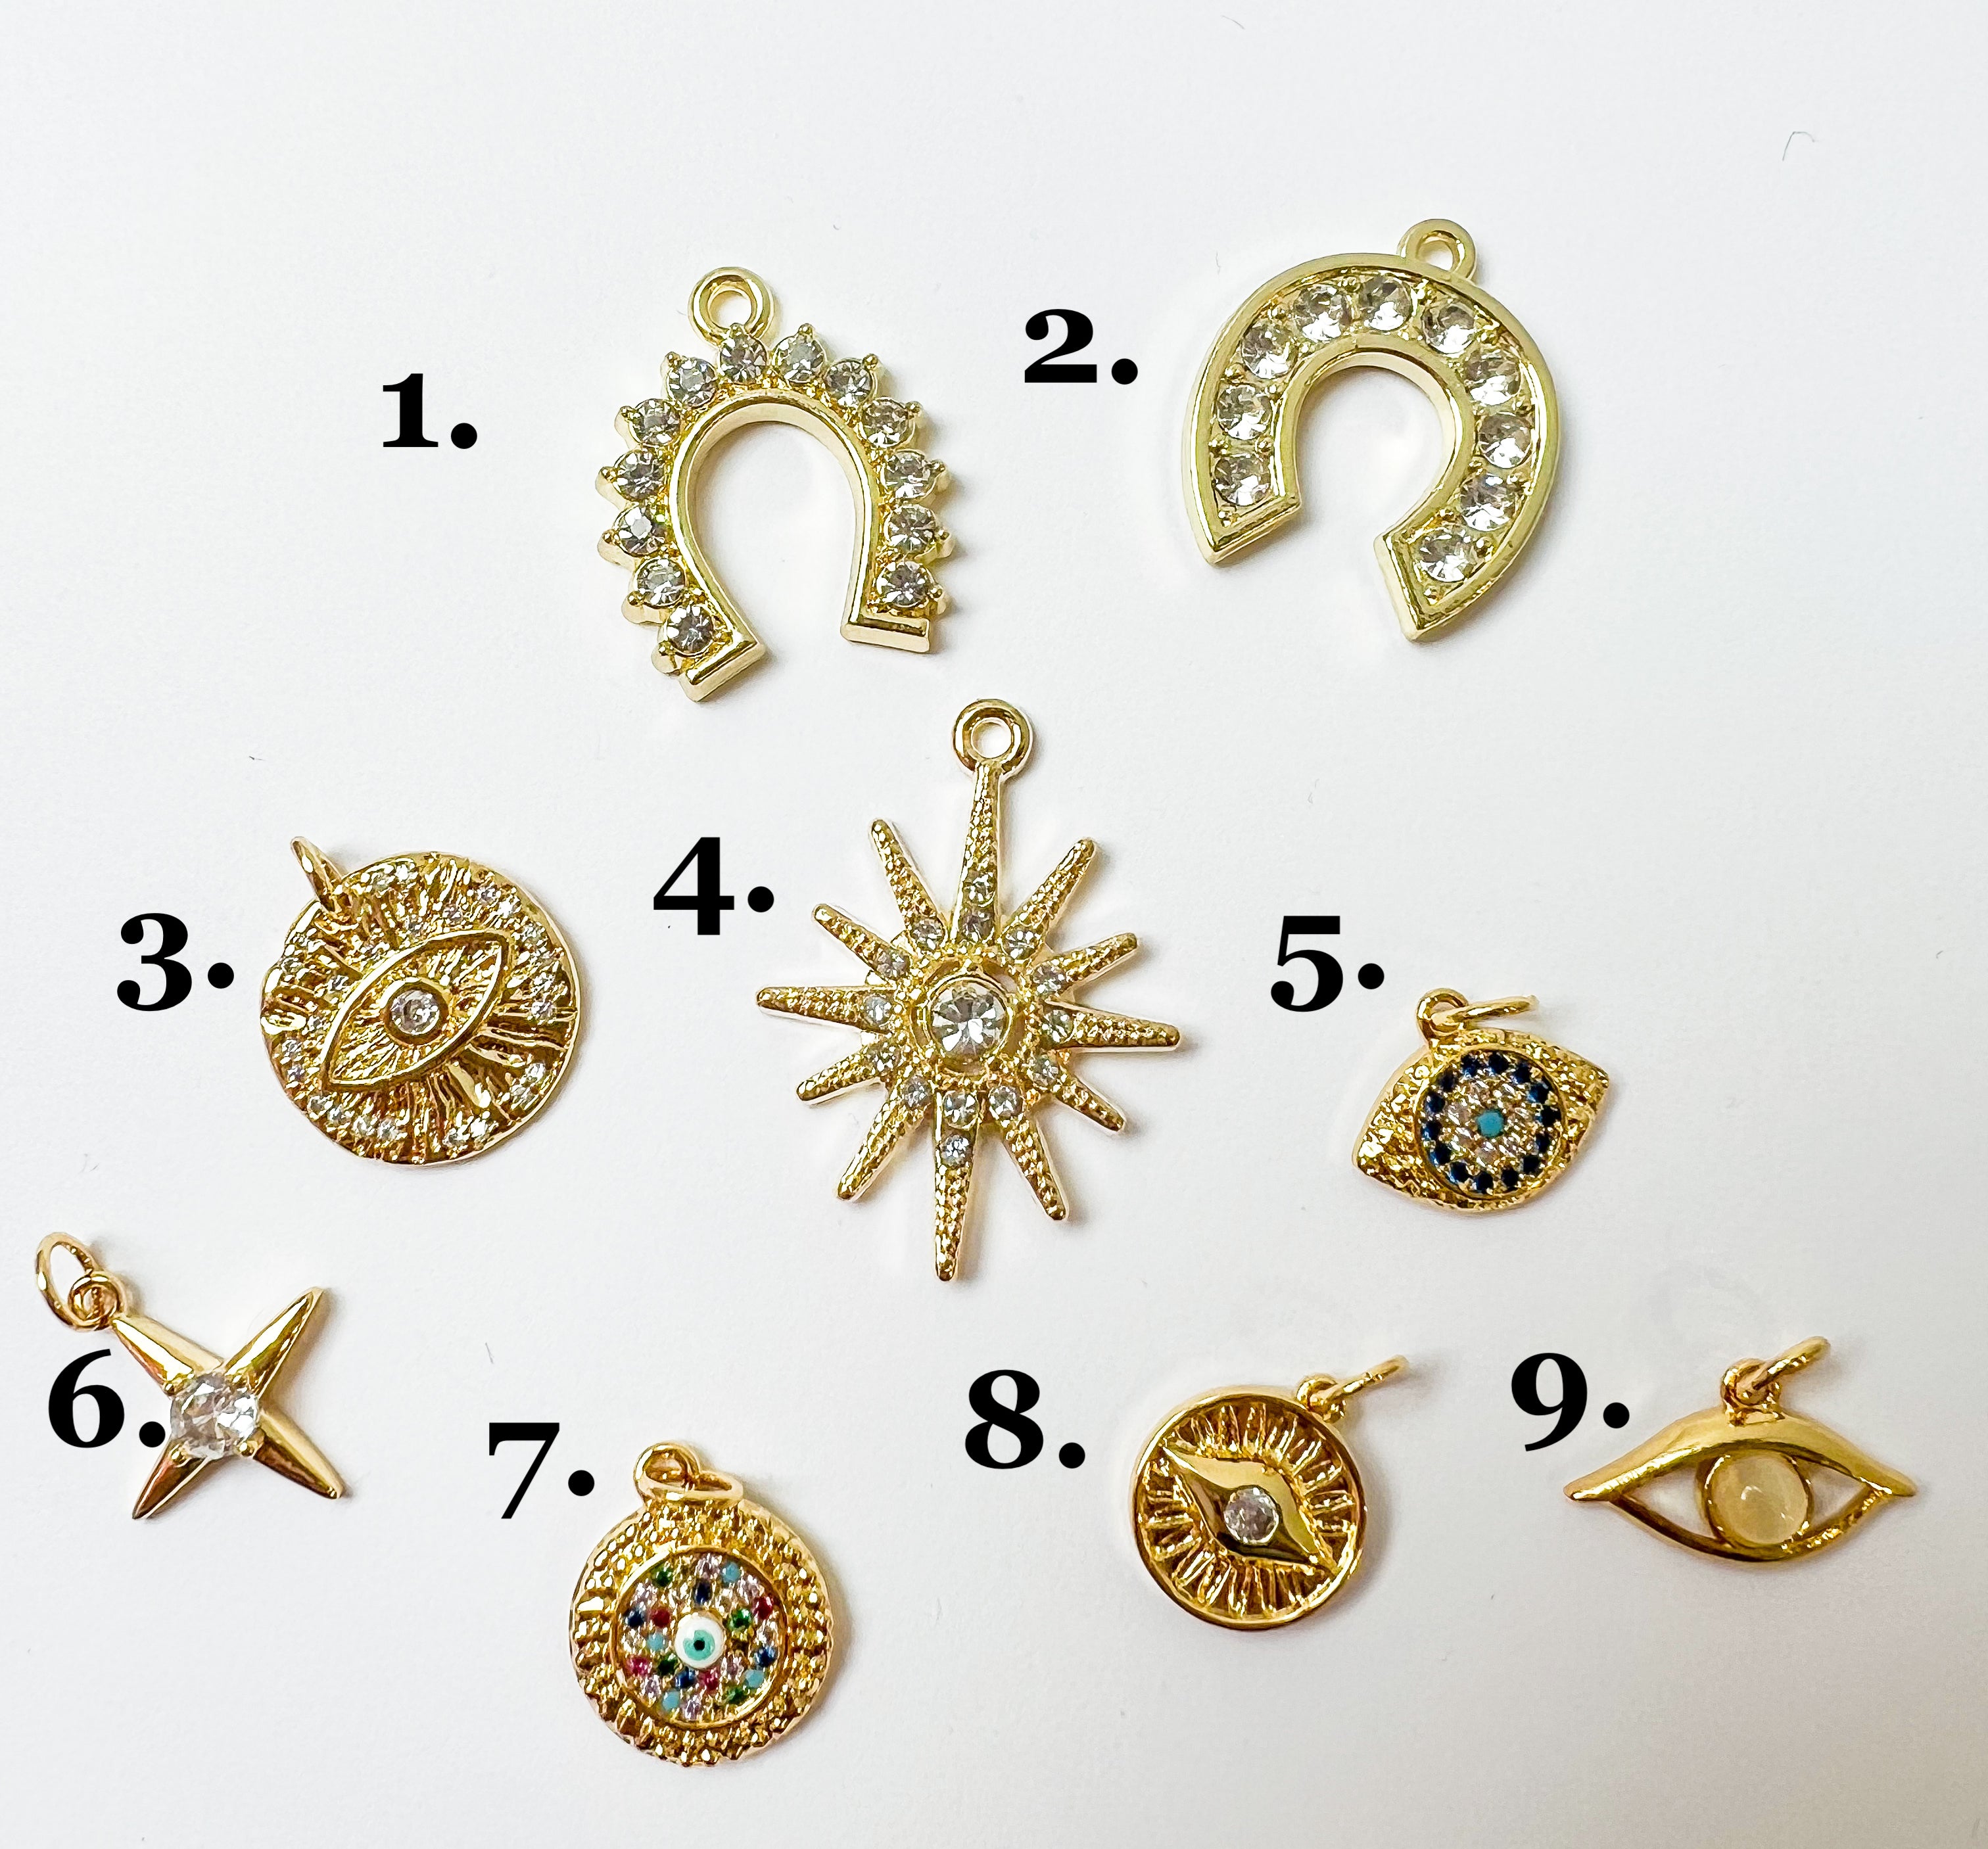 Choose your Charm: Bejewelled Charms